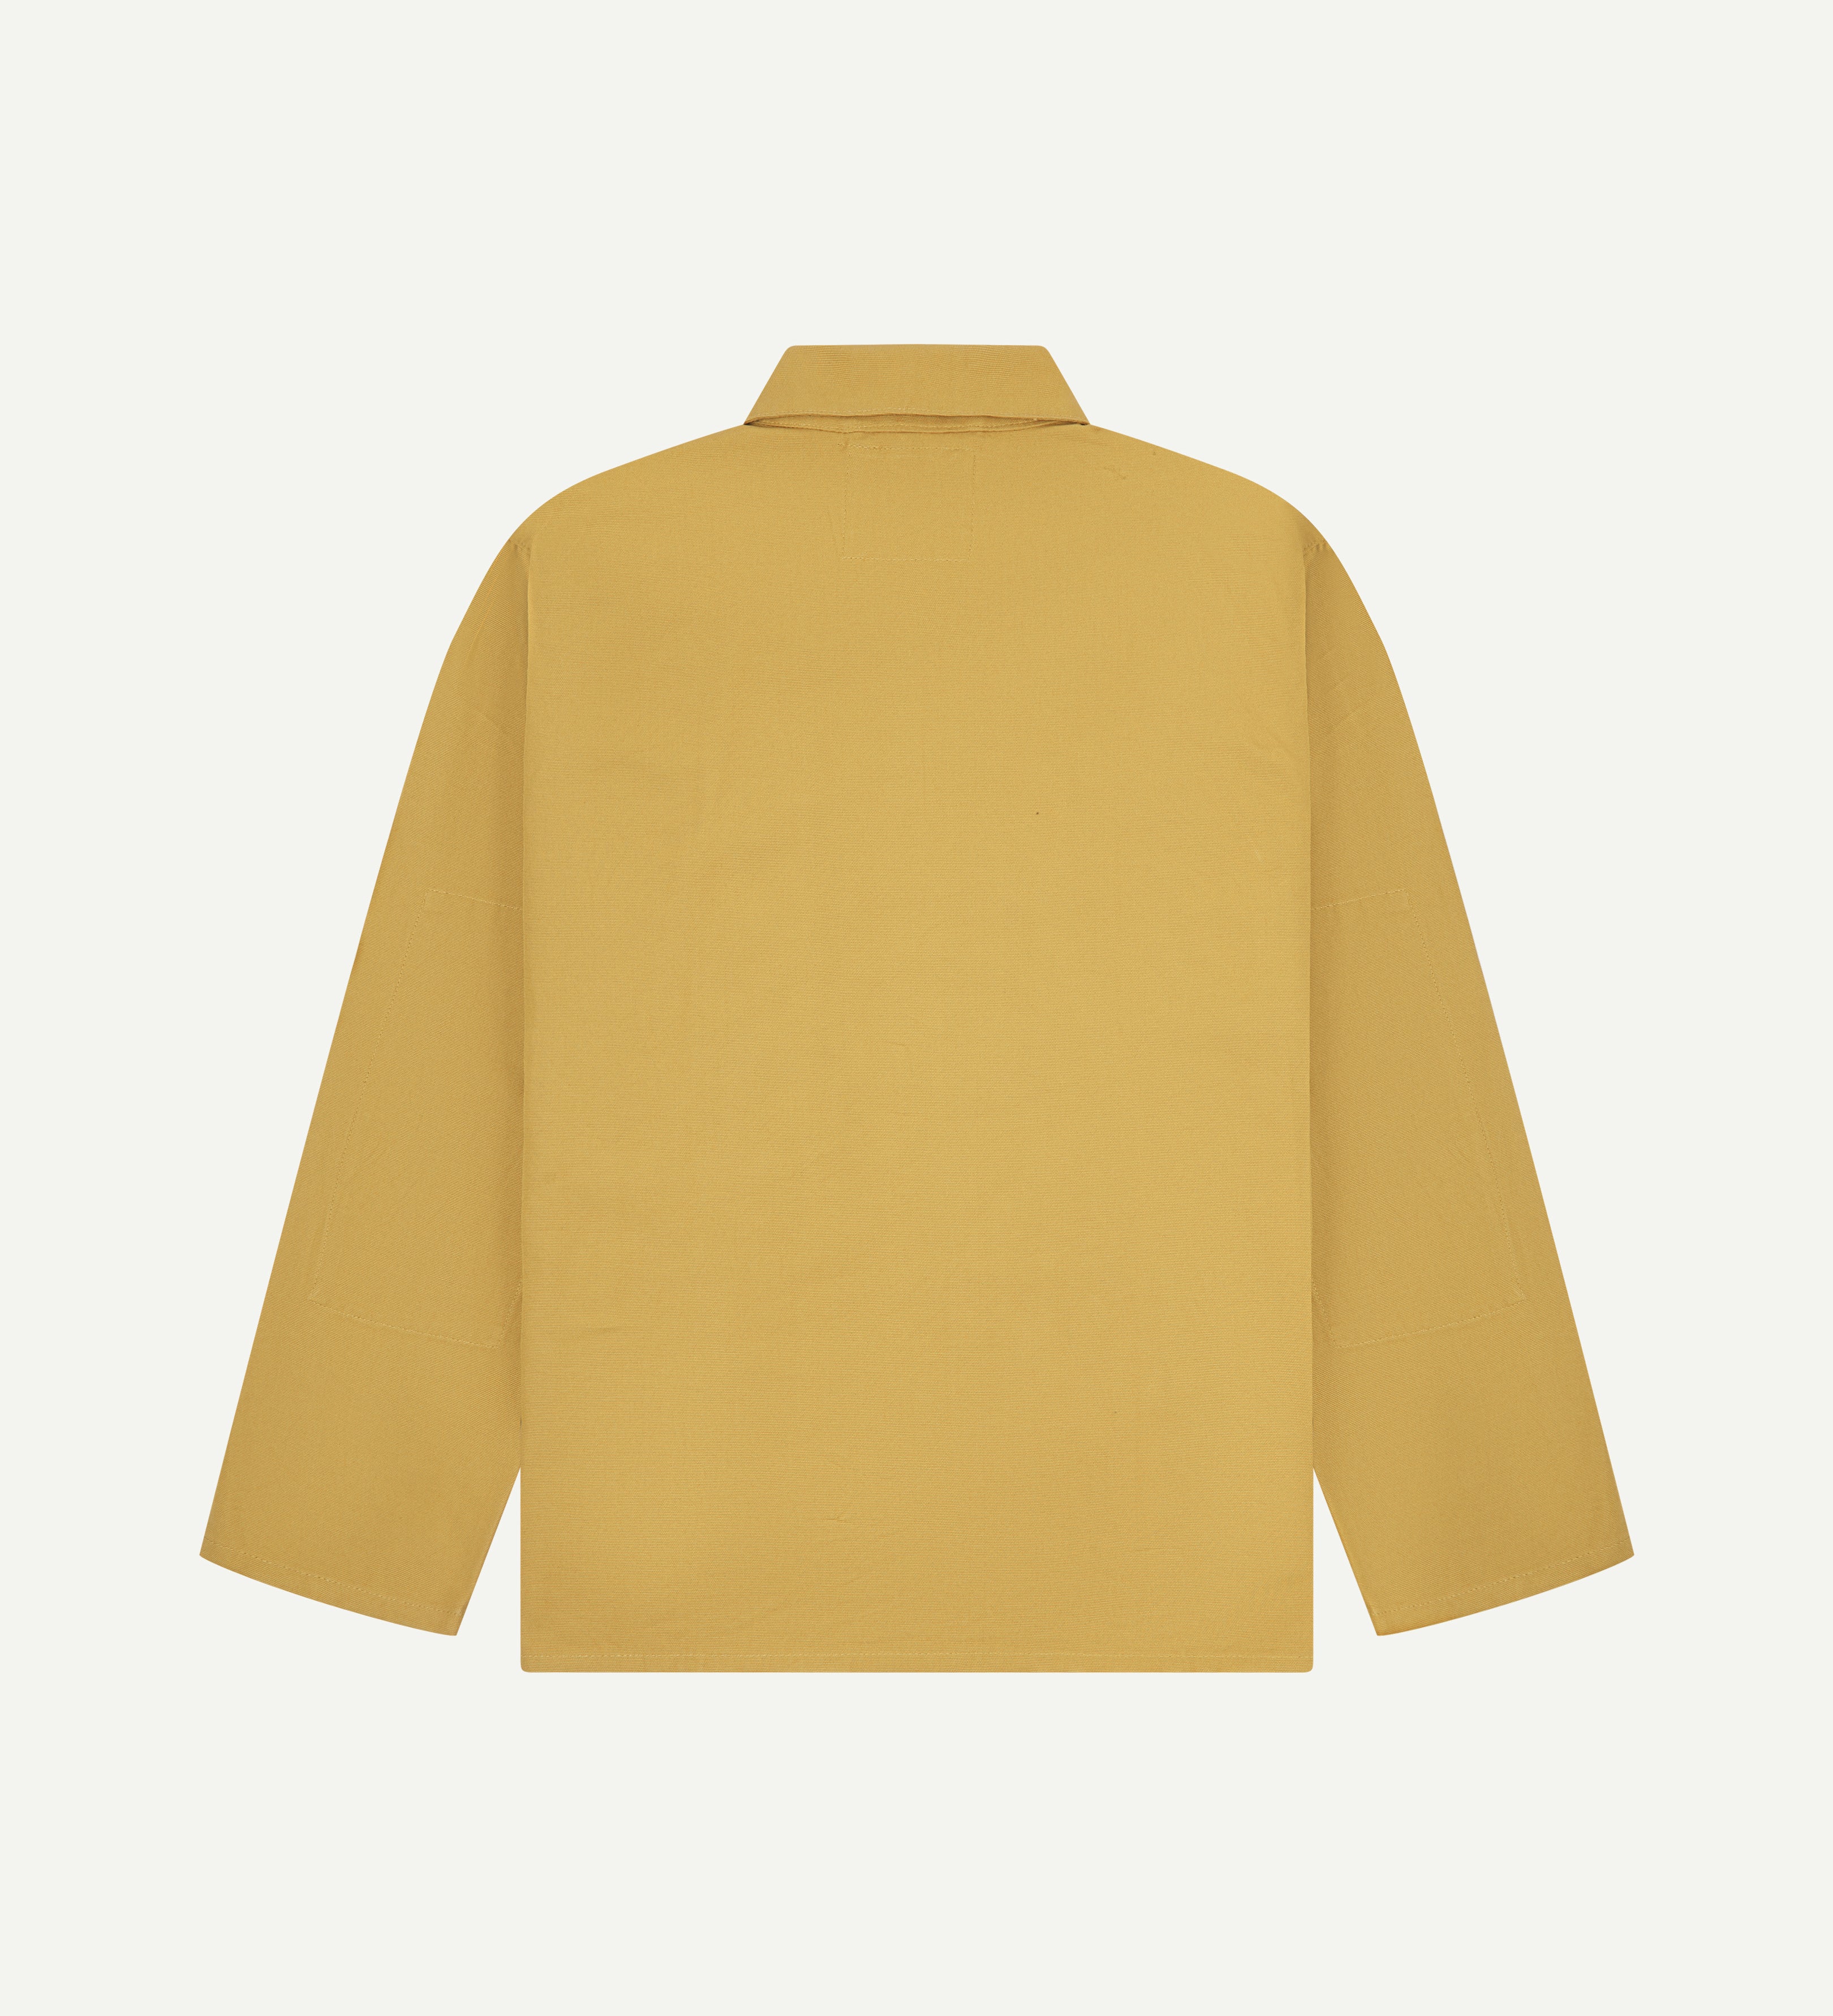 Flat back view of a yellow men's shirt jacket from uskees